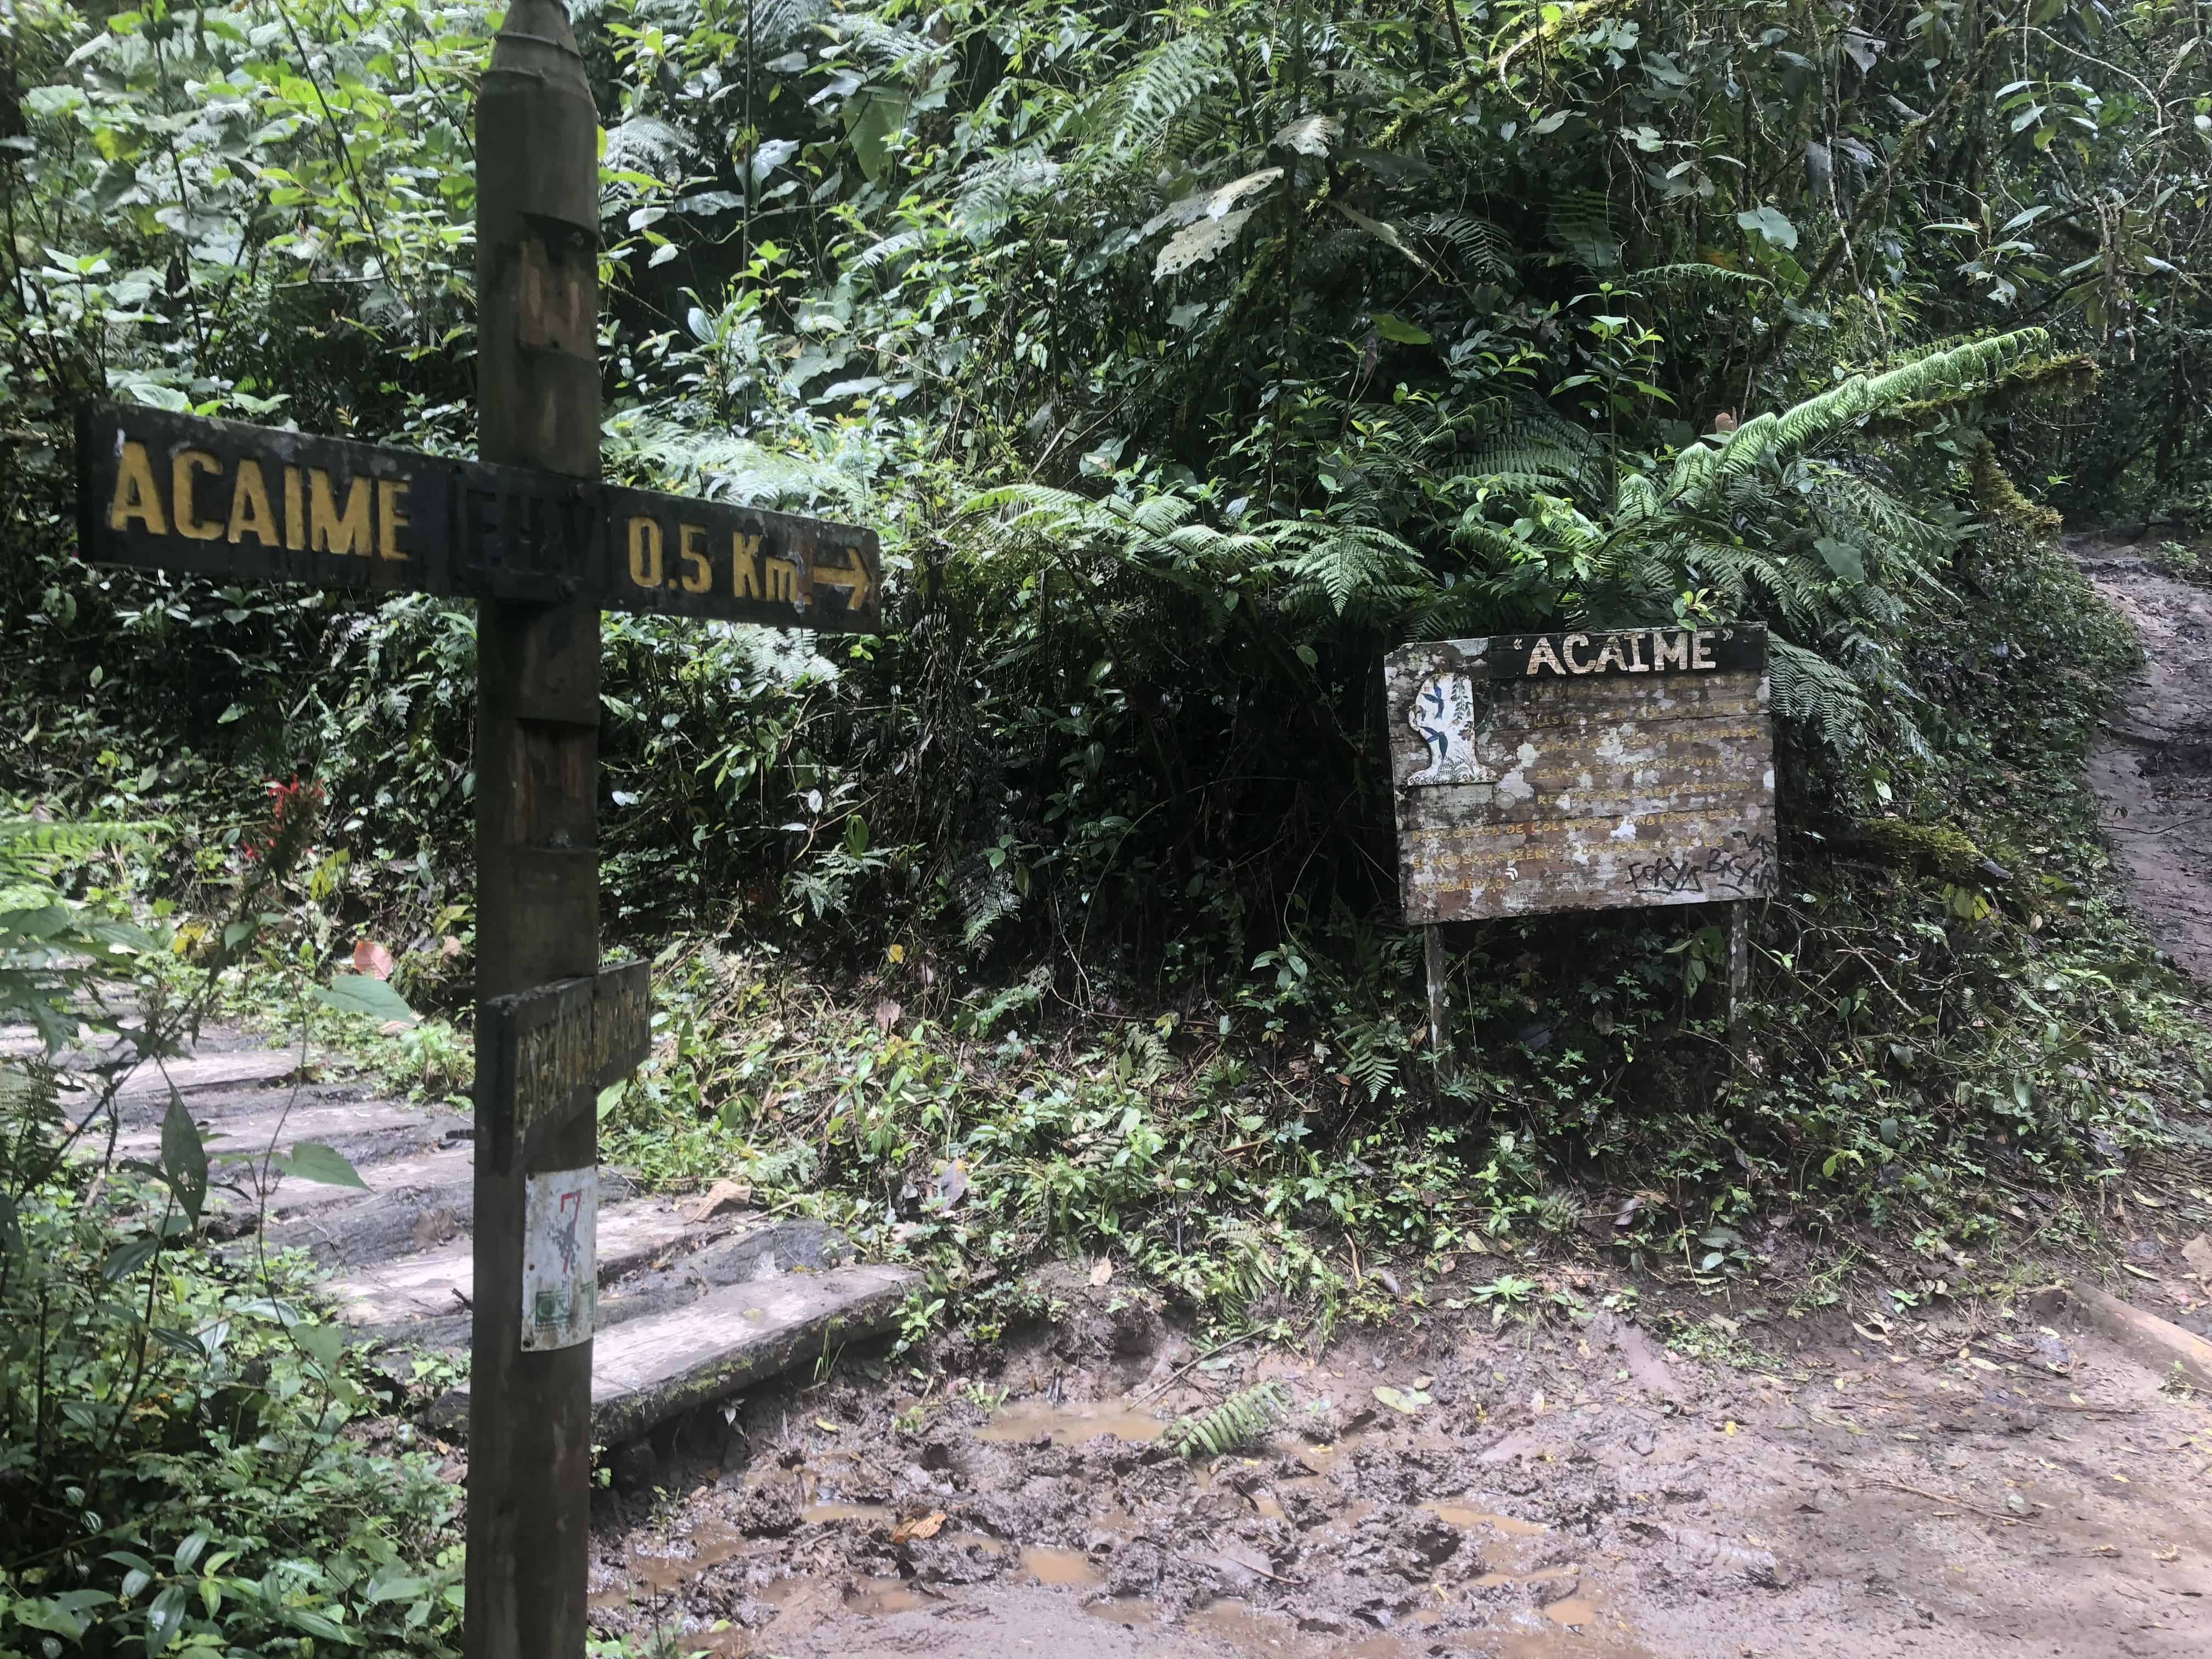 Not too far from Acaime at Cocora Valley in Quindío, Colombia